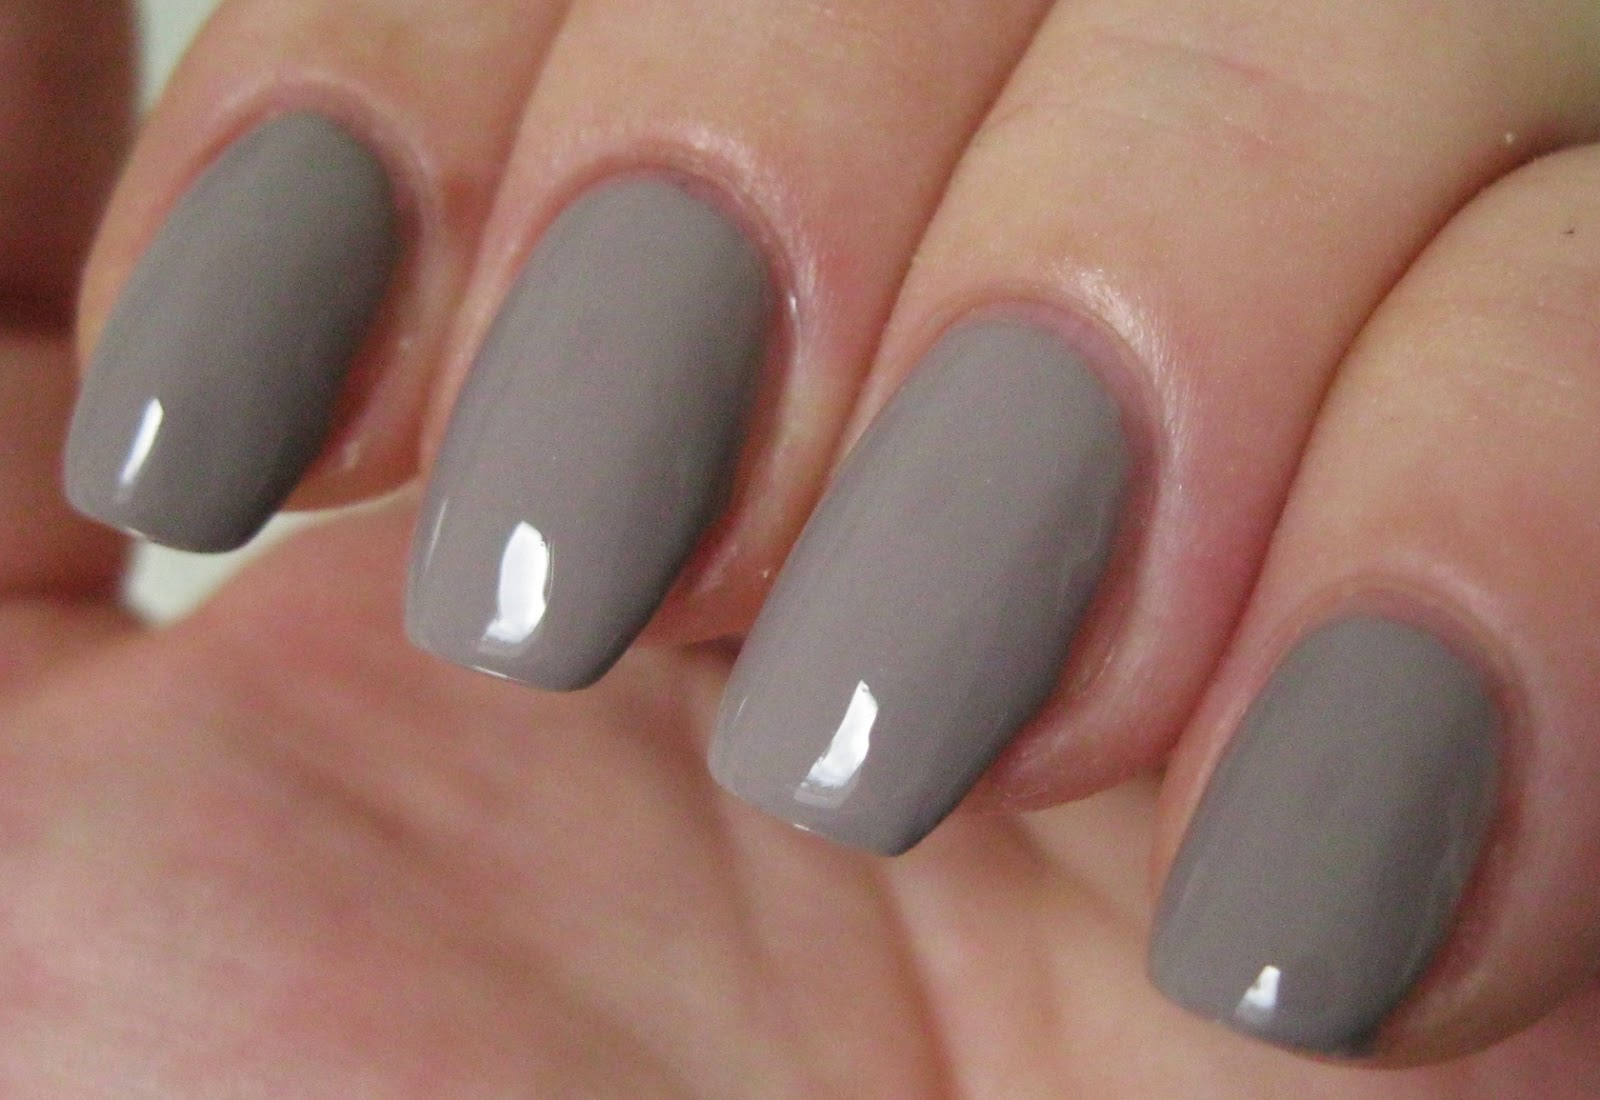 OPI Nail Lacquer in "Taupe-less Beach" - wide 4